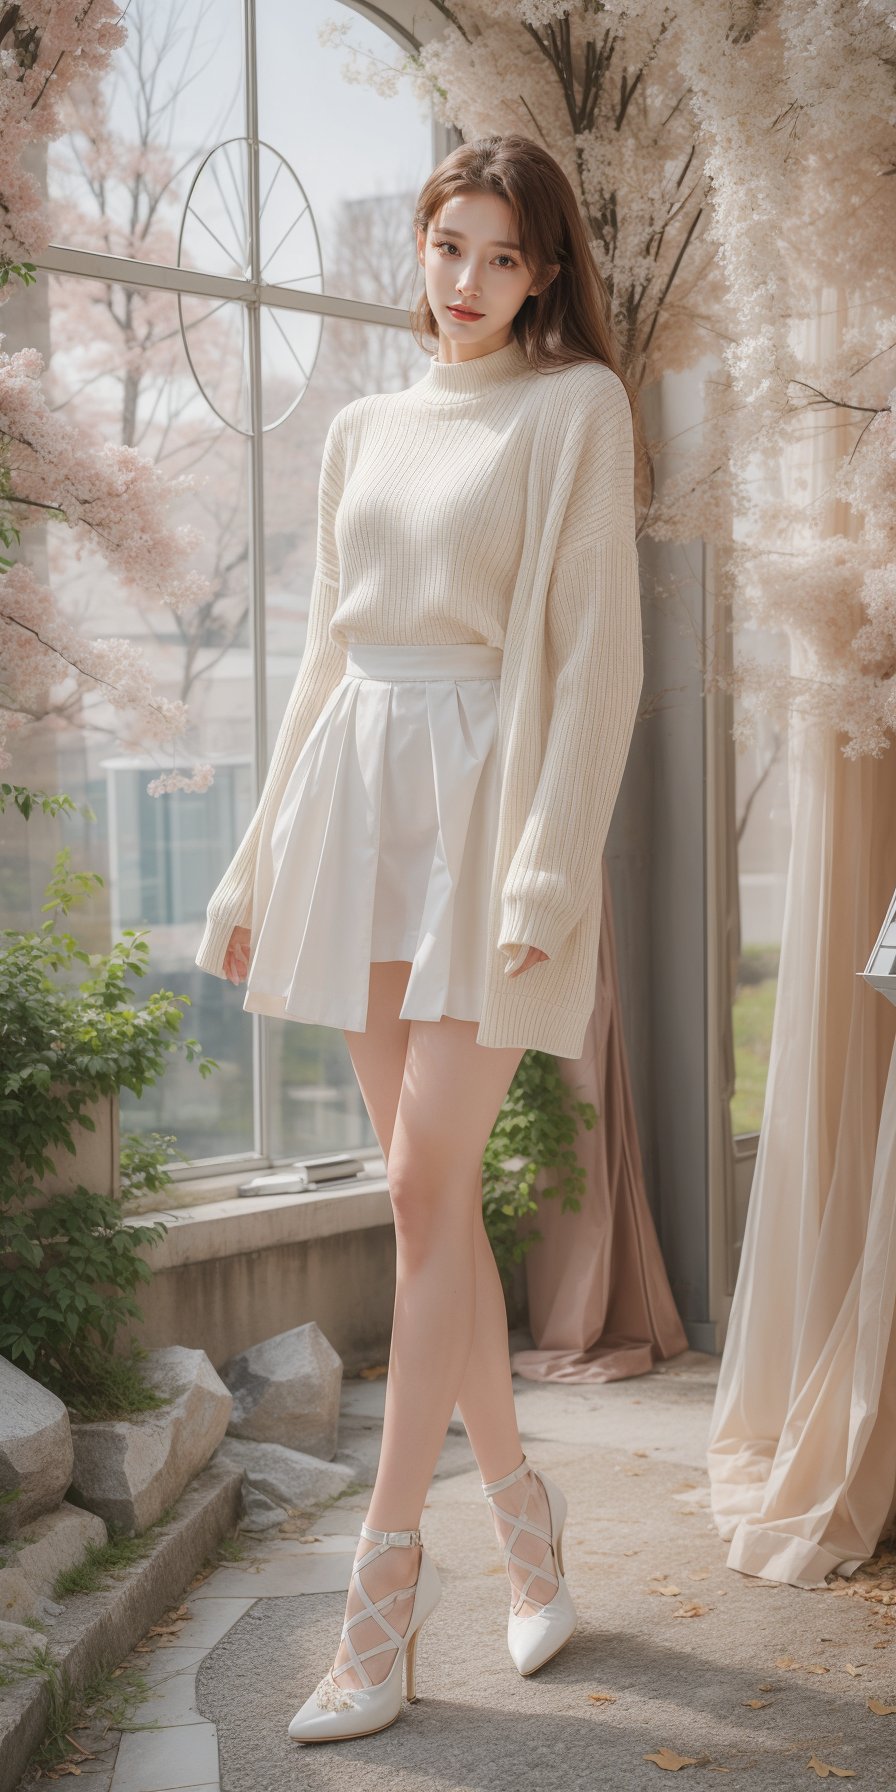 an extremely best quality,masterpiece,(pointed toe high heels:1.2),extremely detailed,realistic,.A beautiful girl casually standing in front of cherry tree and mecha,center,whole body,mecha,long hair,white miniskirt,long legs,high heels,looking at the camera,photo..,